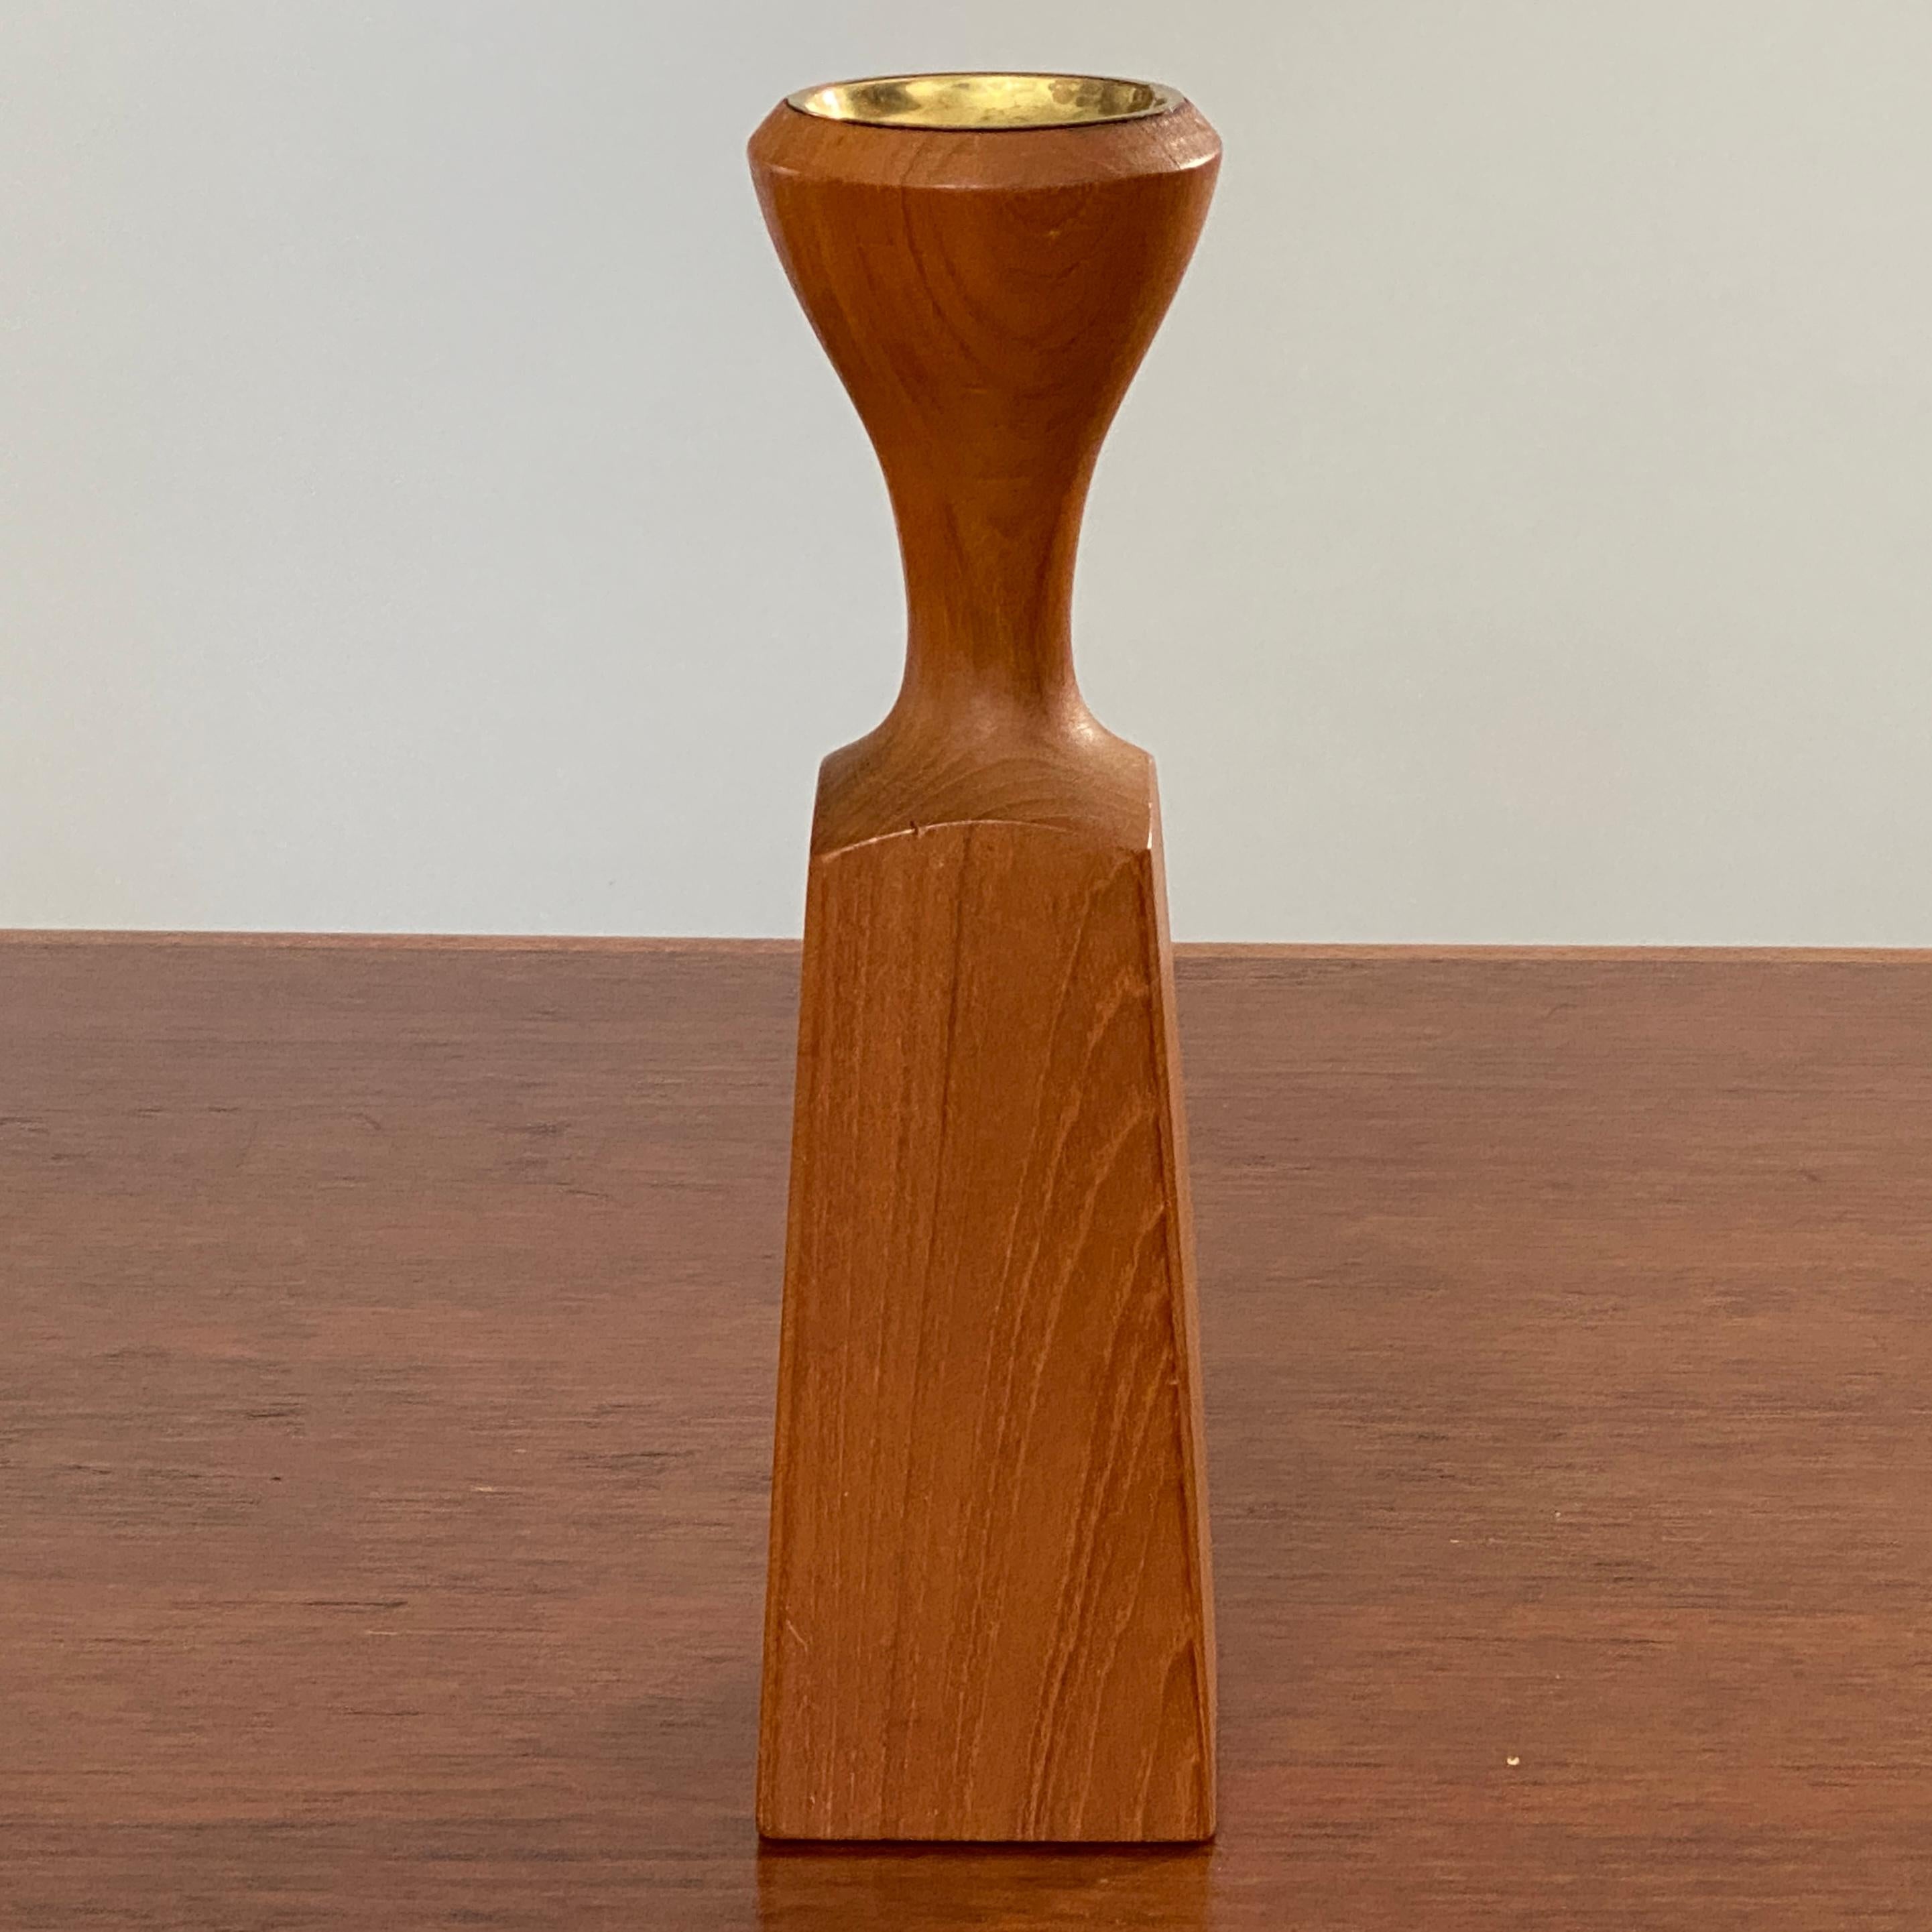 Dansk Jens Quistgaard Danish Modern Tall Teak Candle Holder With Brass Rim In Good Condition For Sale In West Chester, PA